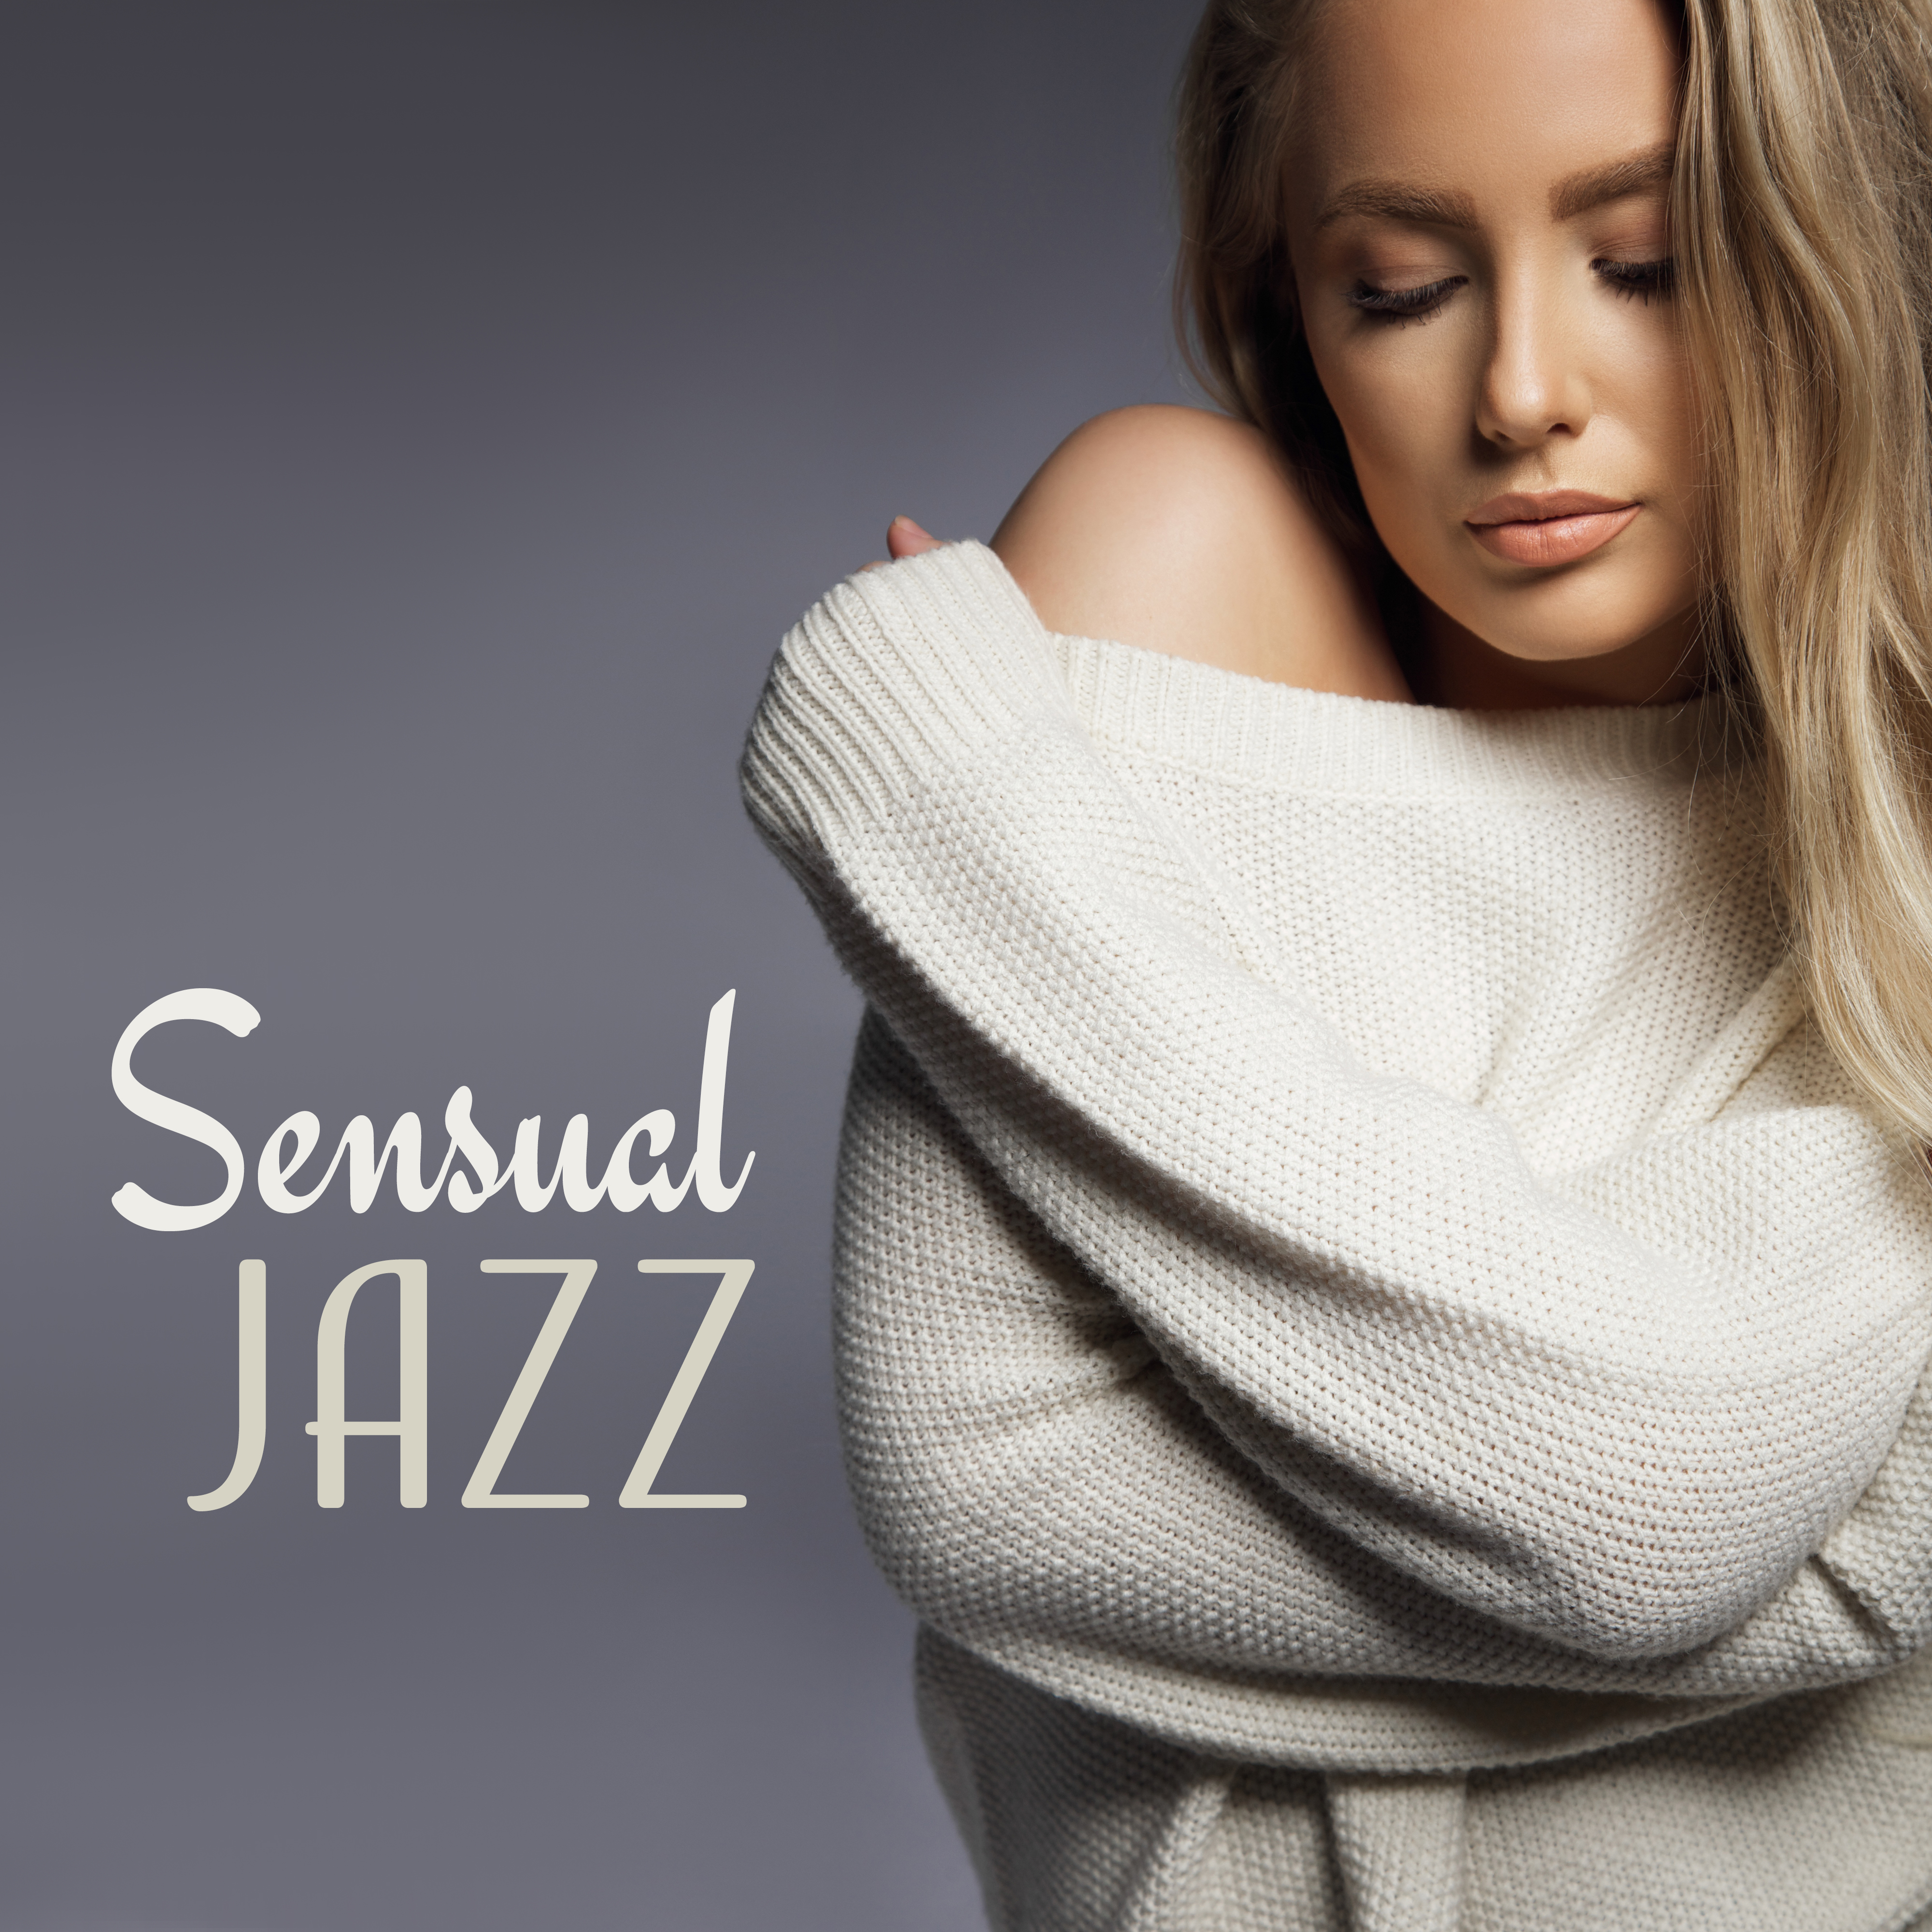 Sensual Jazz – *** Music, Erotic Dance, Fancy Games, Smooth Jazz for Two, Chilled Time